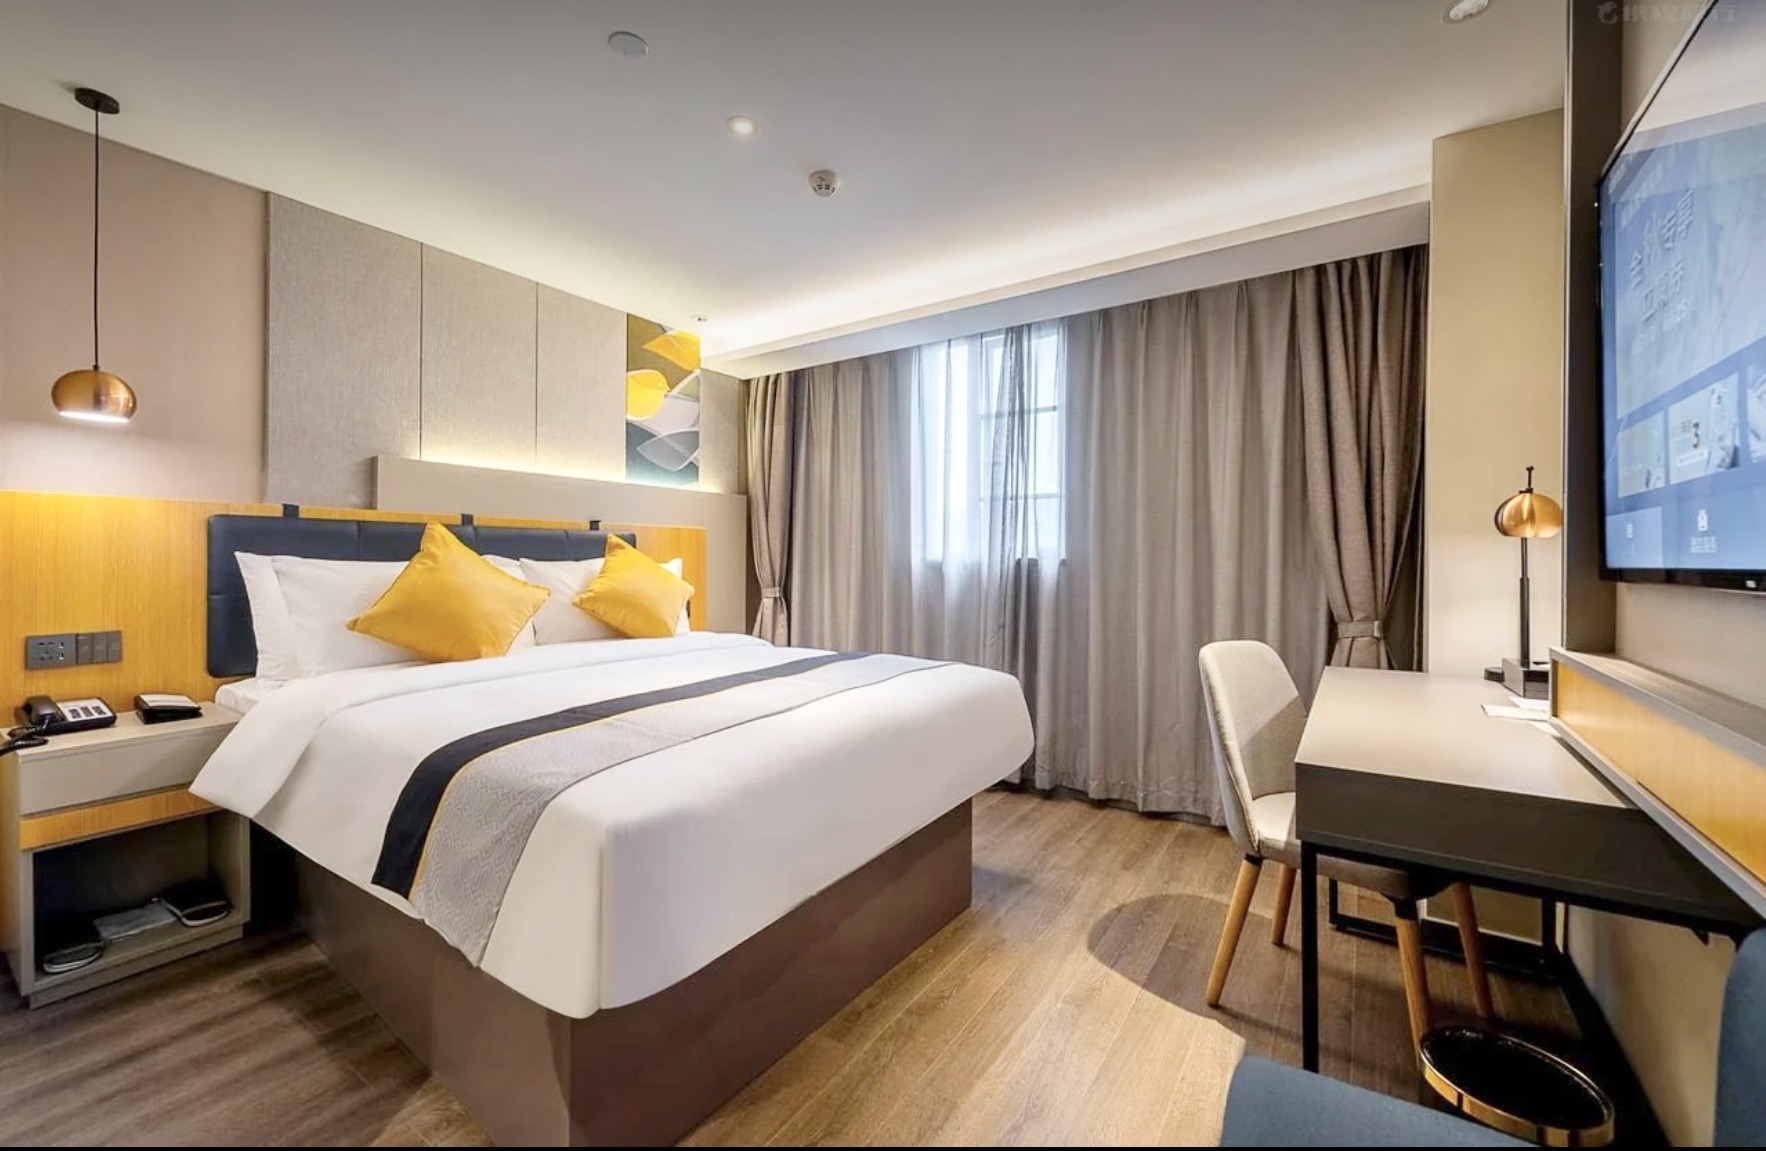 Home Inn Teemall - Guangzhou - Great prices at HOTEL INFO